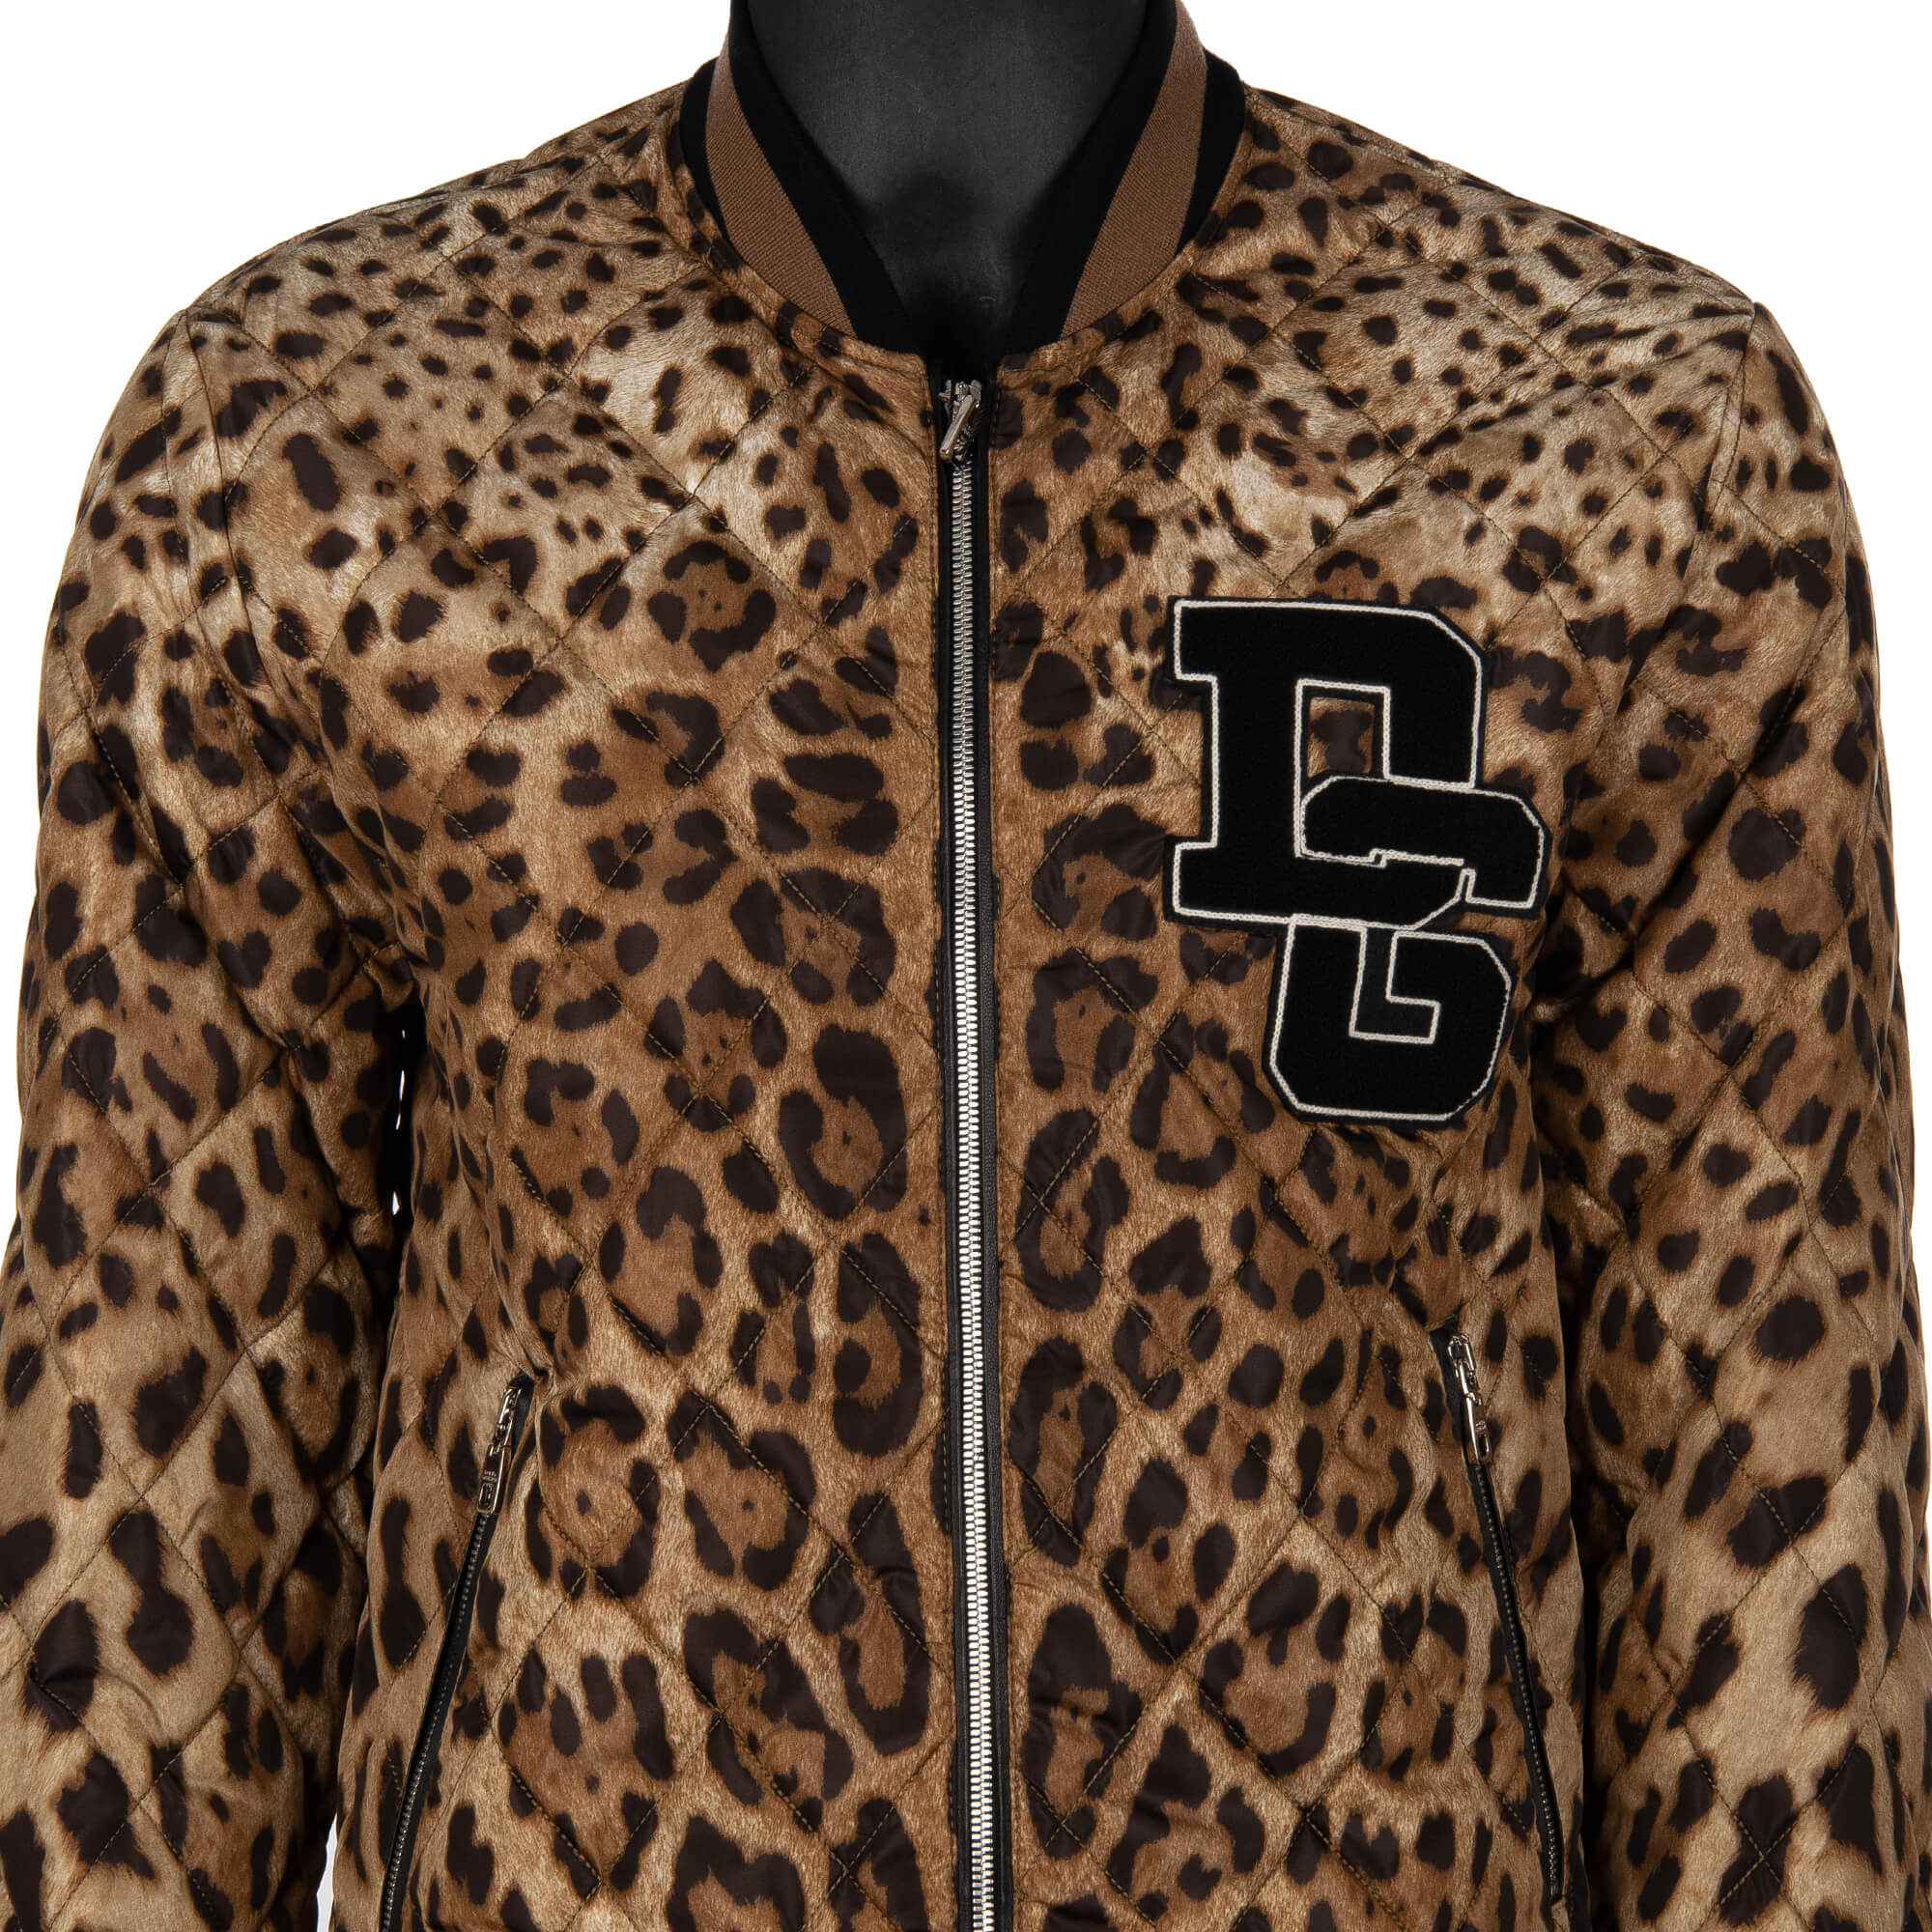 Dolce & Gabbana Quilted Leopard Printed Nylon Bomber Jacket with